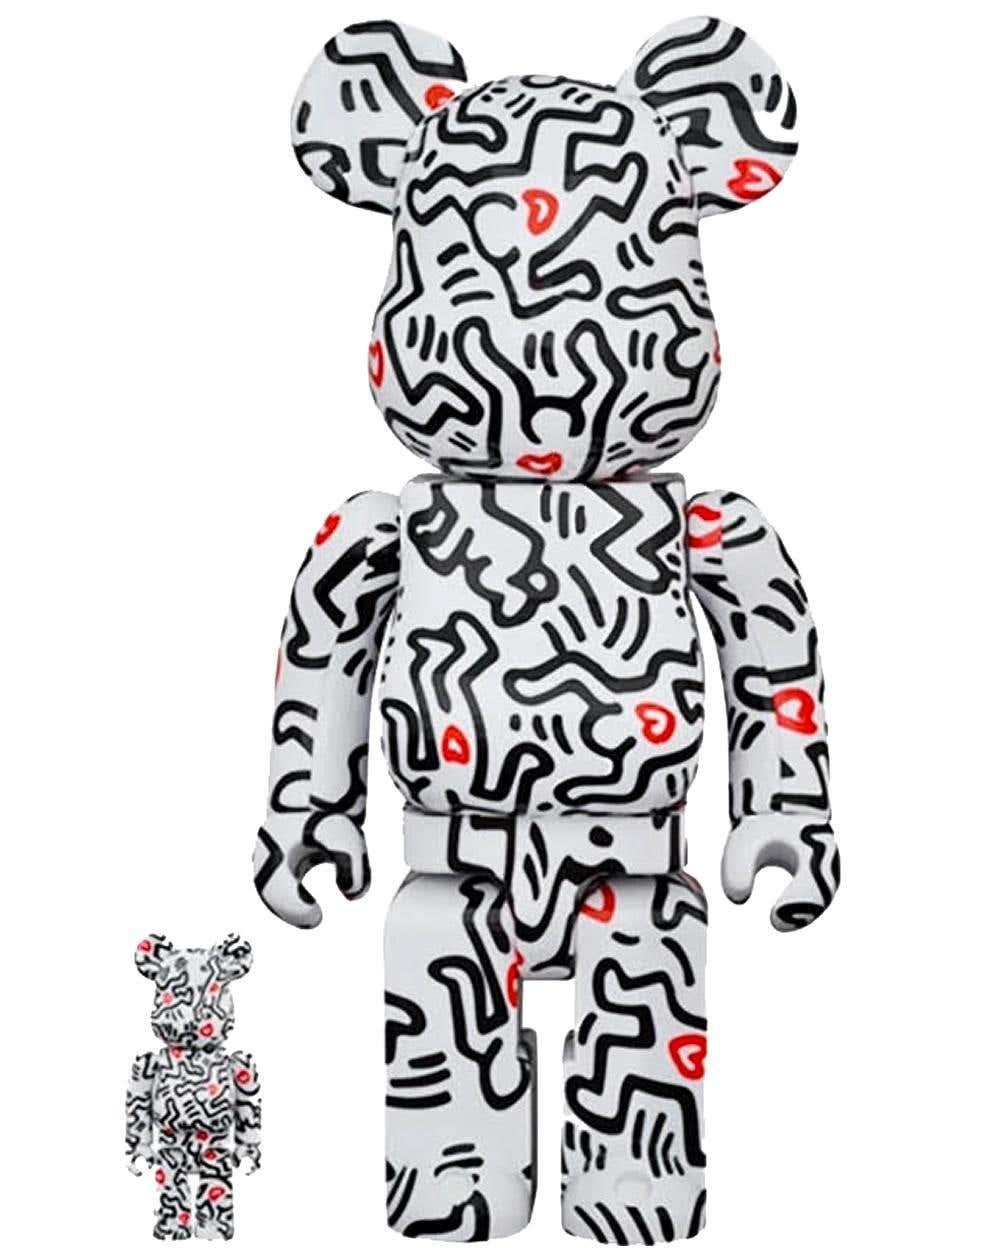 Estate of Jean-Michel Basquiat & Keith Haring Foundation  400% Bearbrick Vinyl Figures: Set of two individual works:
Unique, timeless Haring, Basquiat collectibles trademarked & licensed by the Estate of Jean-Michel Basquiat & Keith Haring (each